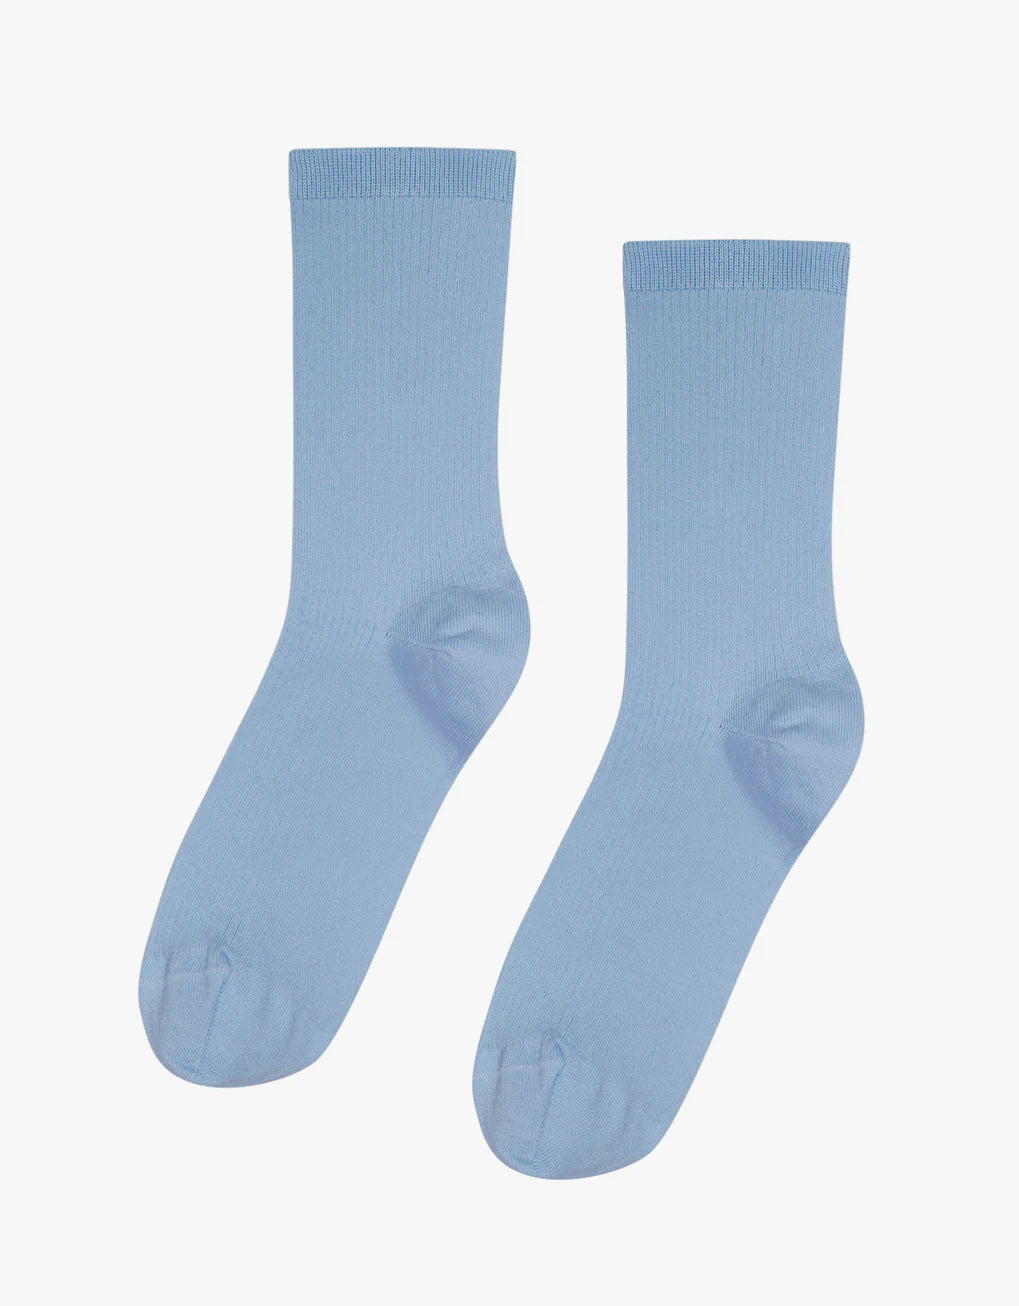 A pair of Classic Organic Socks by Colorful Standard, in light blue, on a white background.